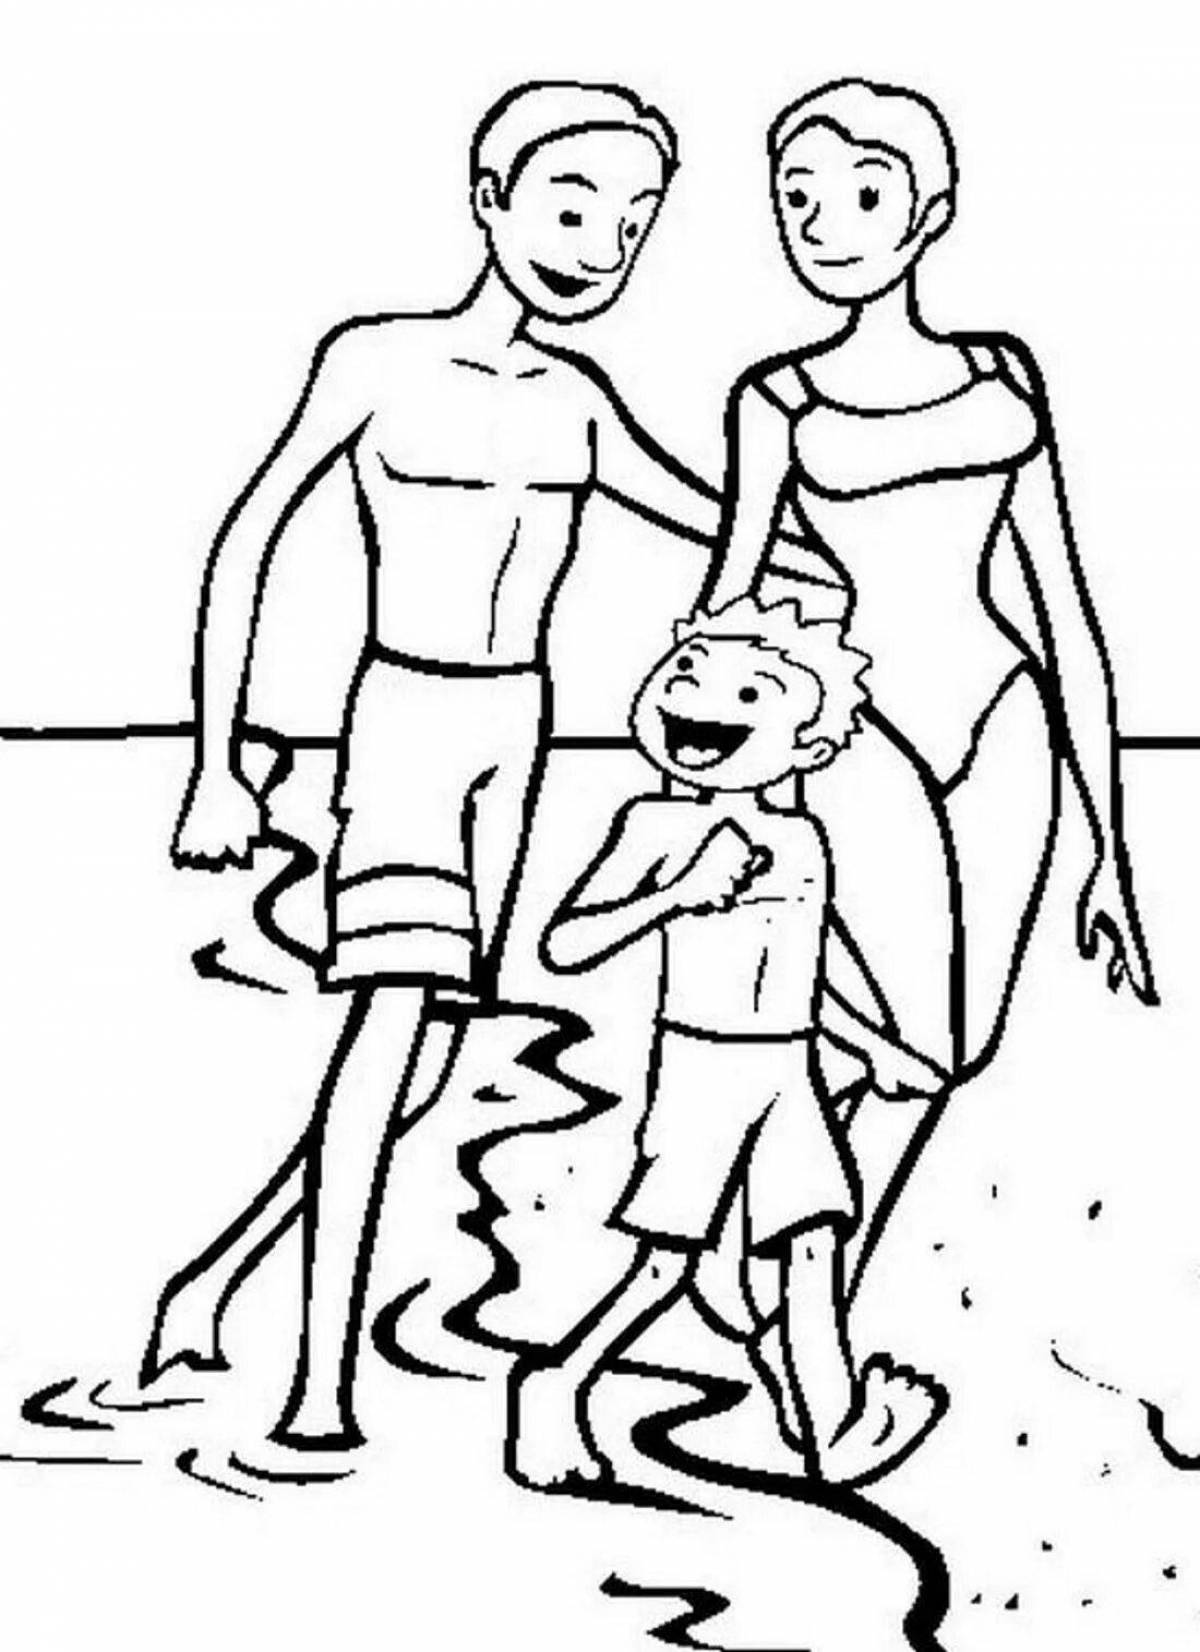 Coloring book exciting family on vacation